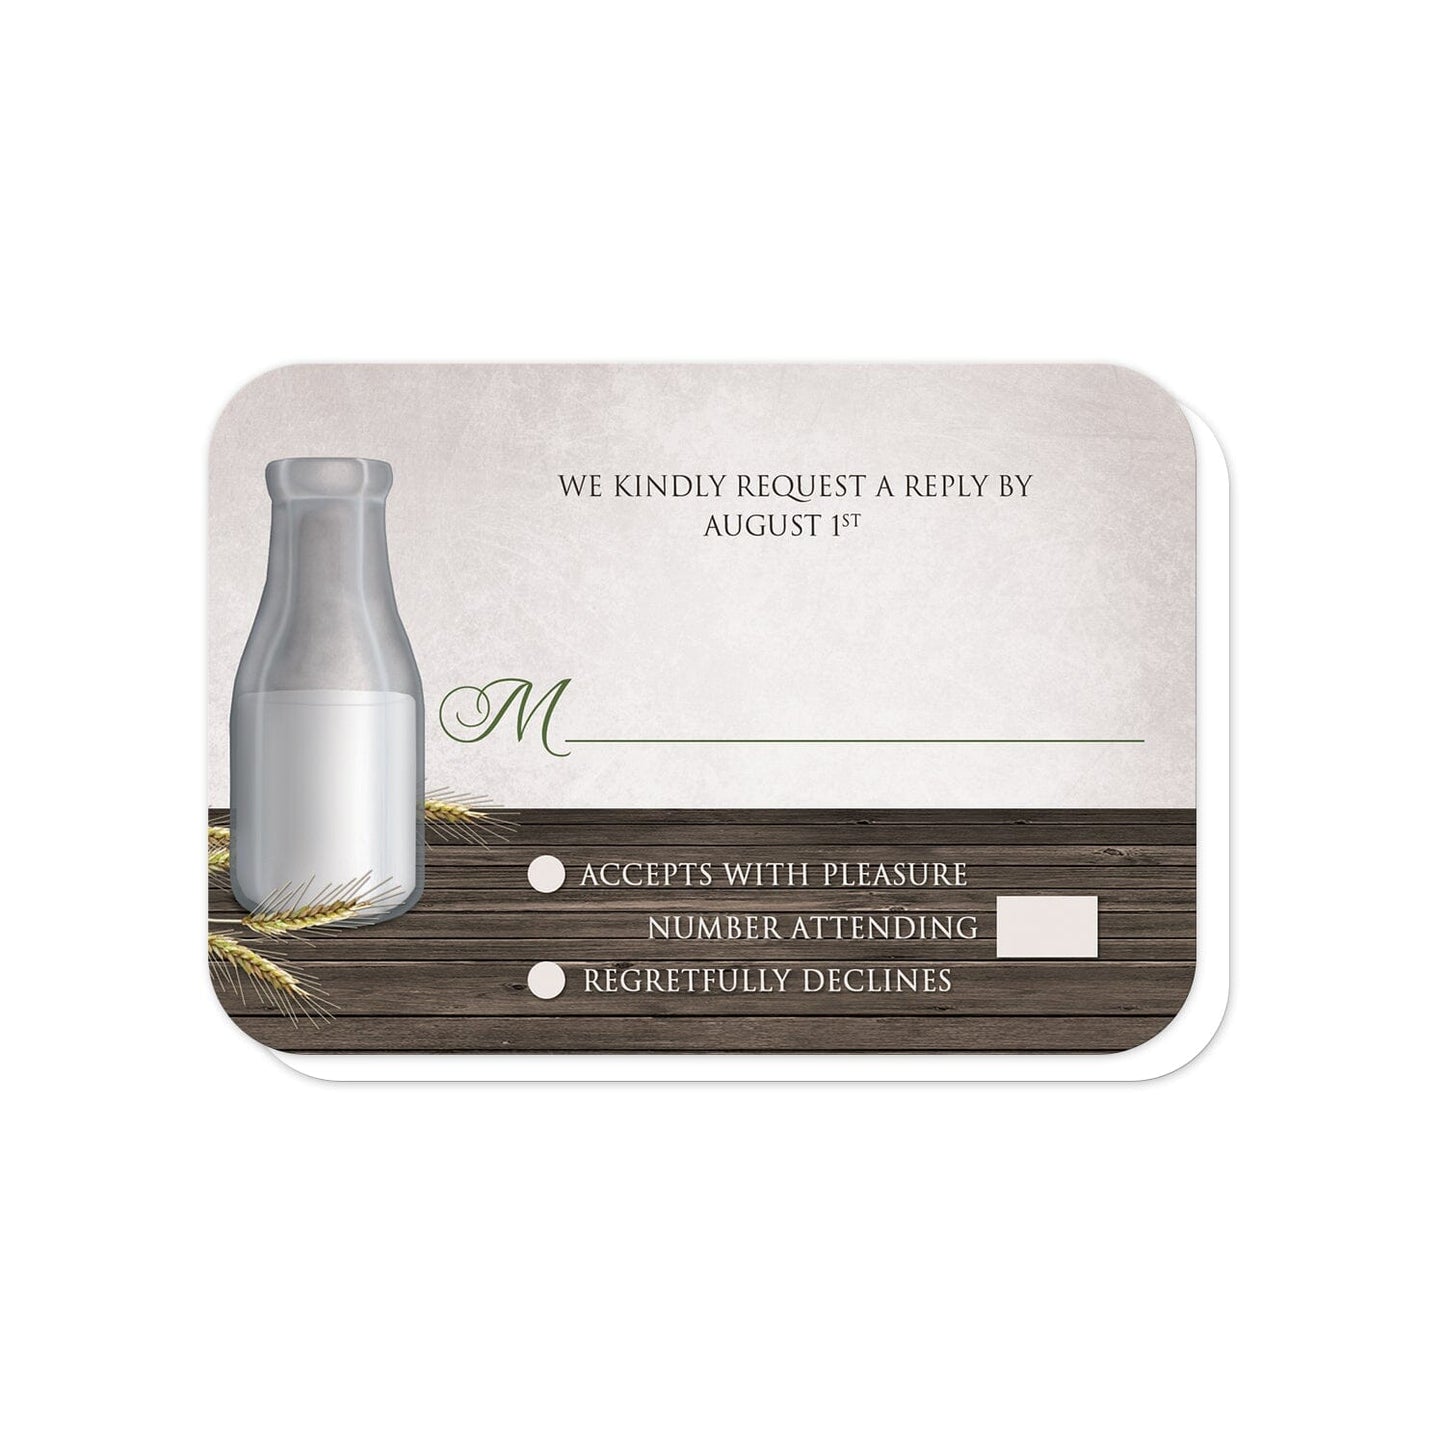 Rustic Country Dairy Farm RSVP Cards (with rounded corners) at Artistically Invited.